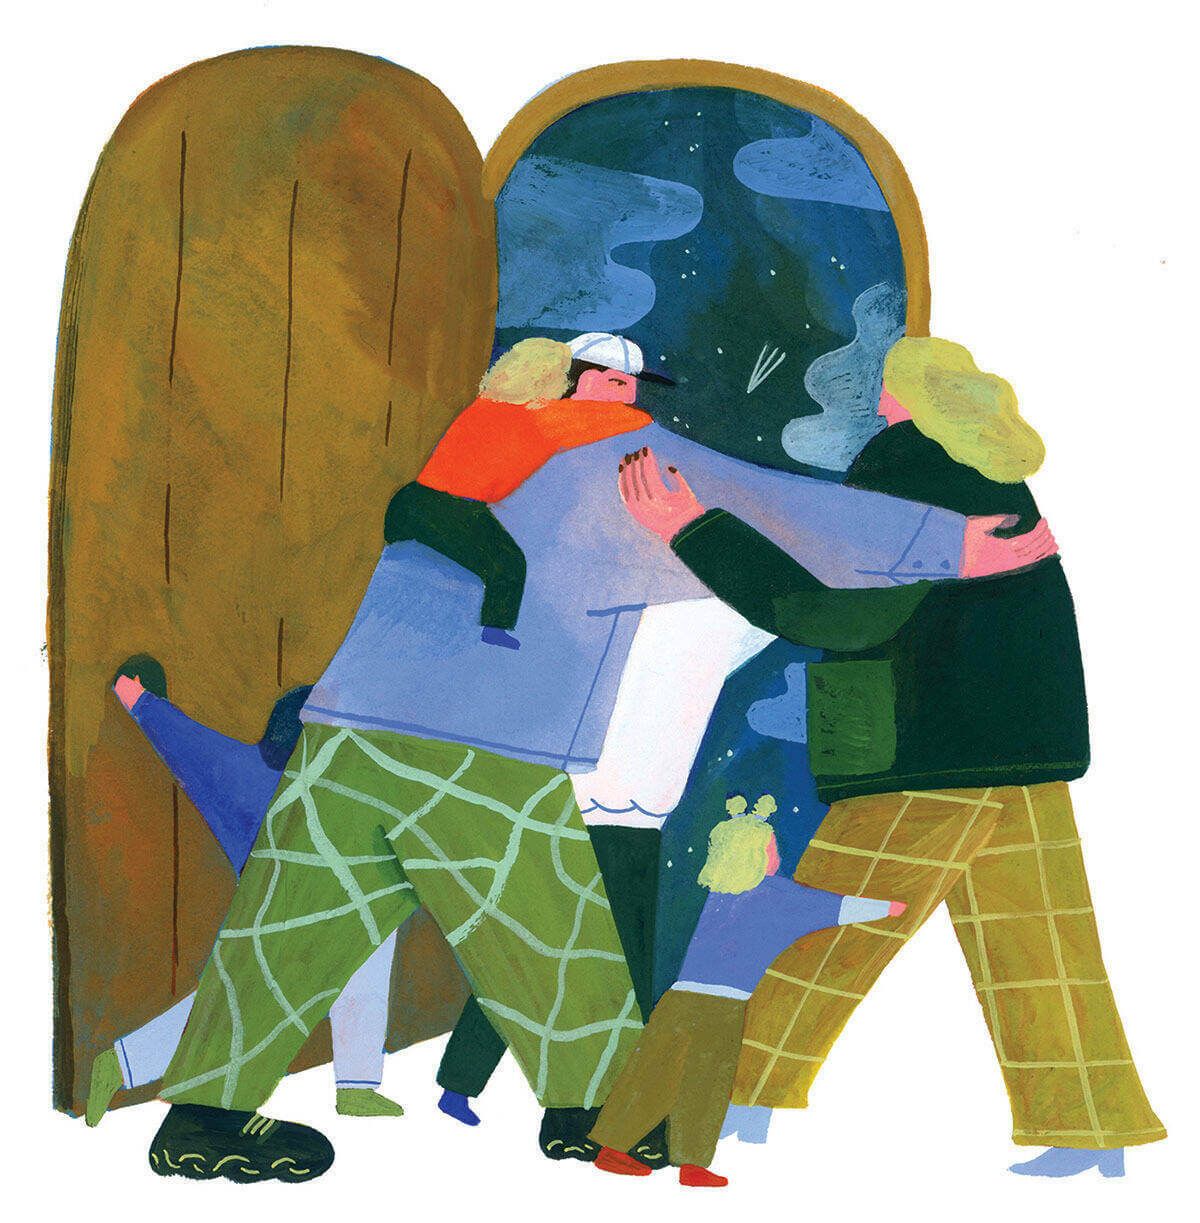 Illustration of a mother, father and four children embrace amid a bit of chaos as they head out the door